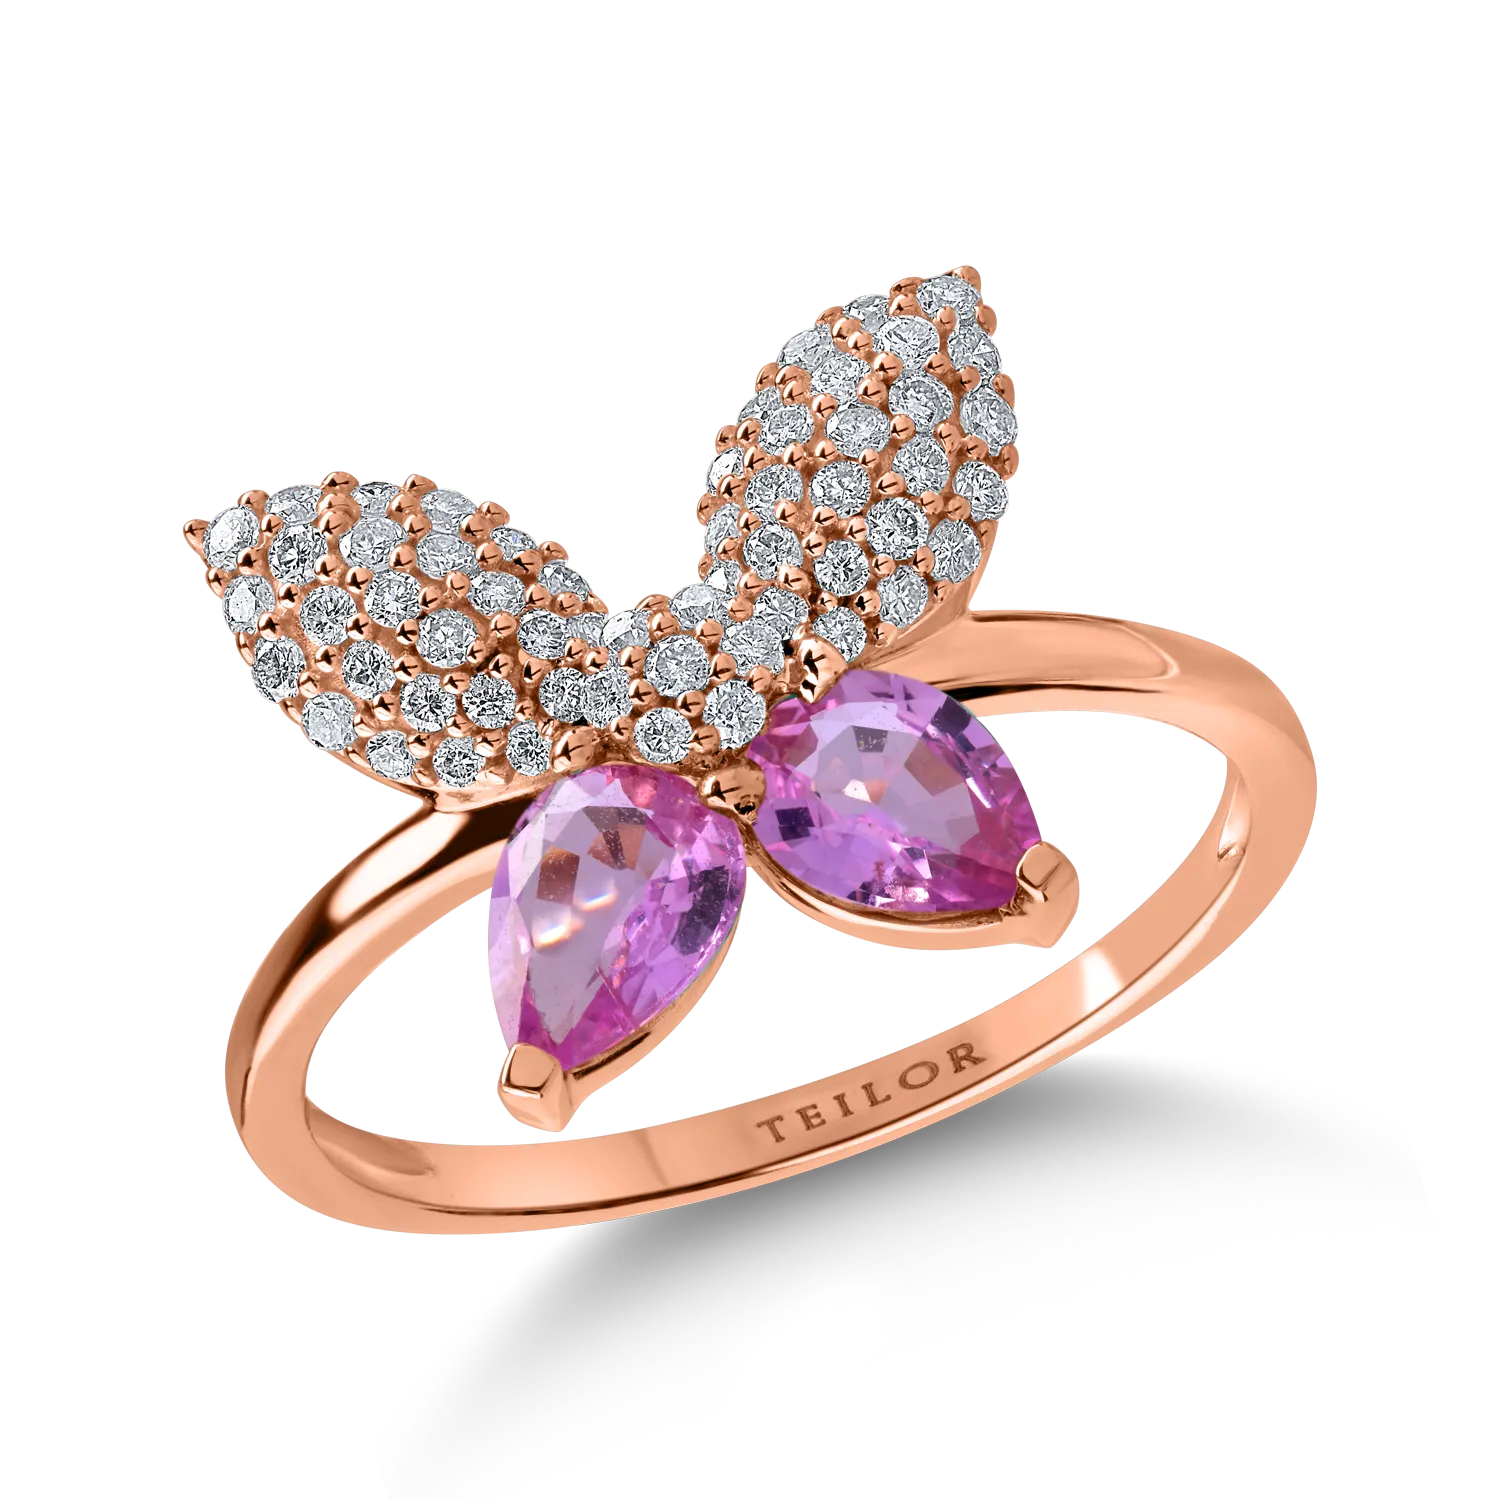 Rose gold butterfly ring with 0.9ct light-pink sapphires and 0.29ct diamonds